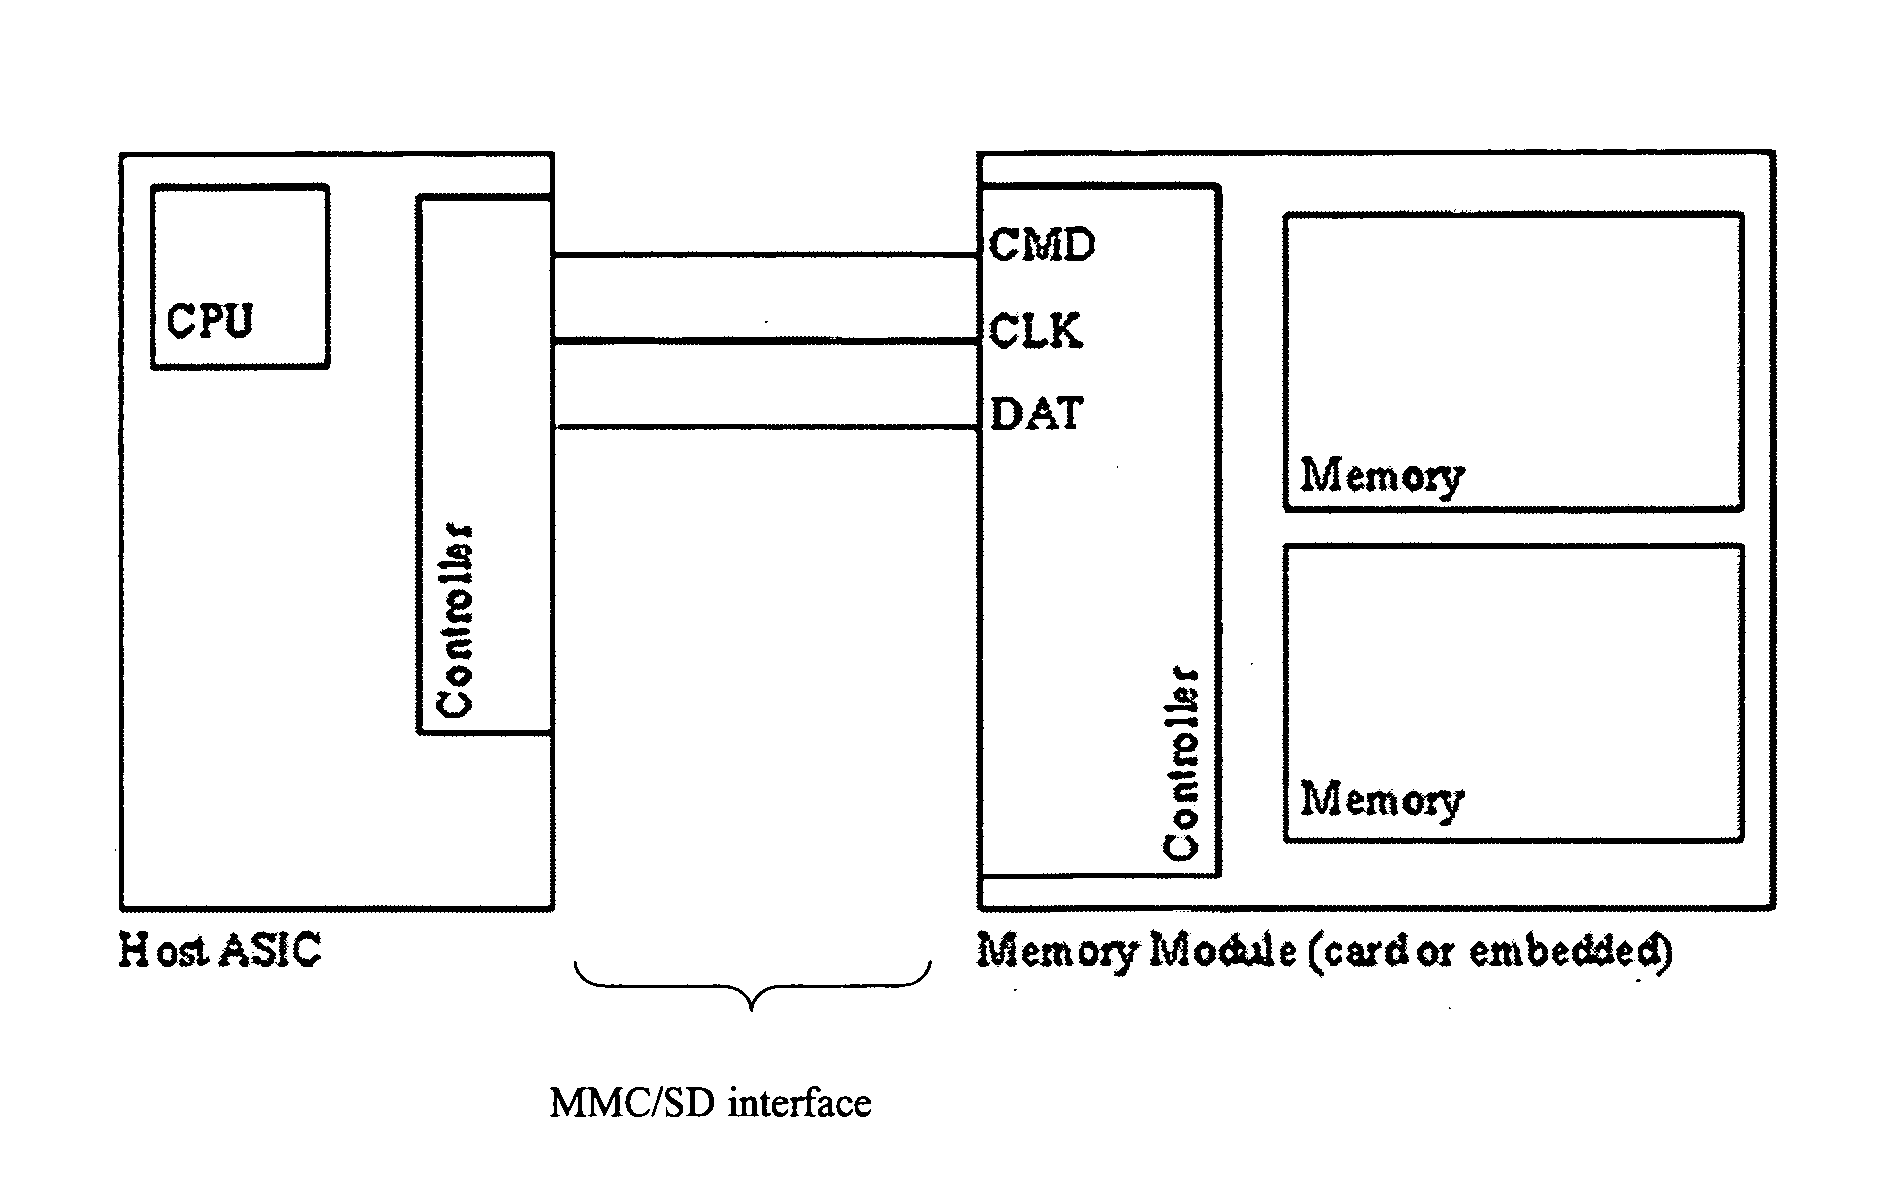 Method for booting a host device from an MMC/SD device, a host device bootable from an MMC/SD device and an MMC/SD device method a host device may booted from